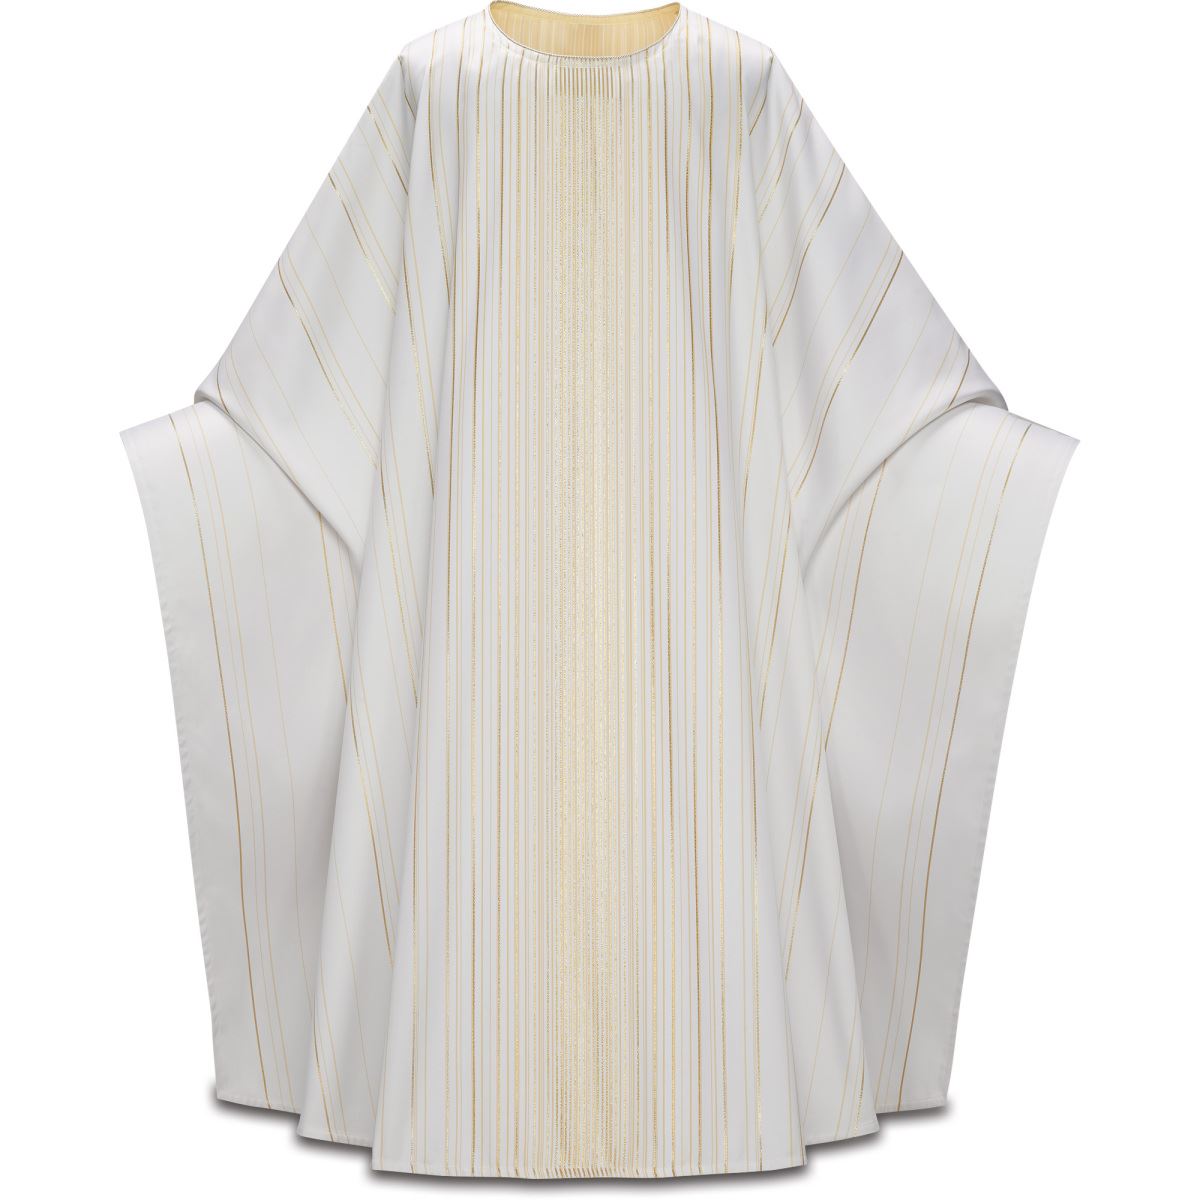 Monastic Chasuble in White Linus Fabric with Plain Collar